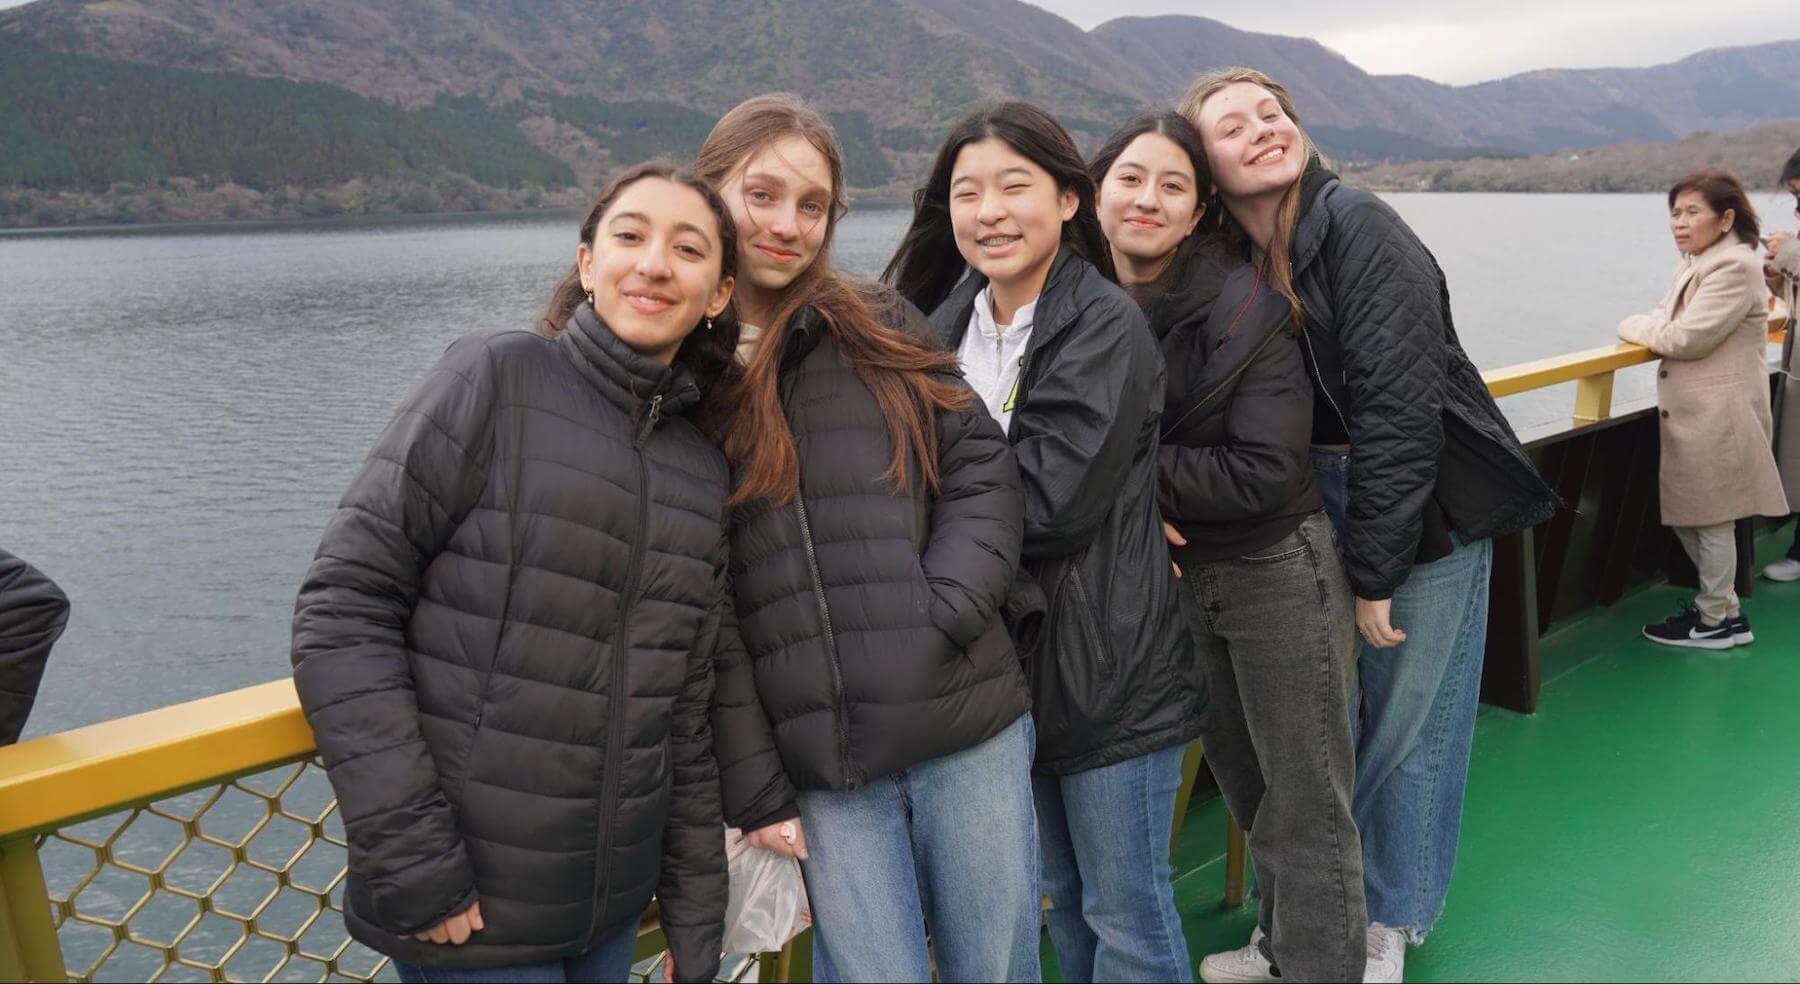 Five Ethical Culture Fieldston Upper School students stand on a boat in Japan